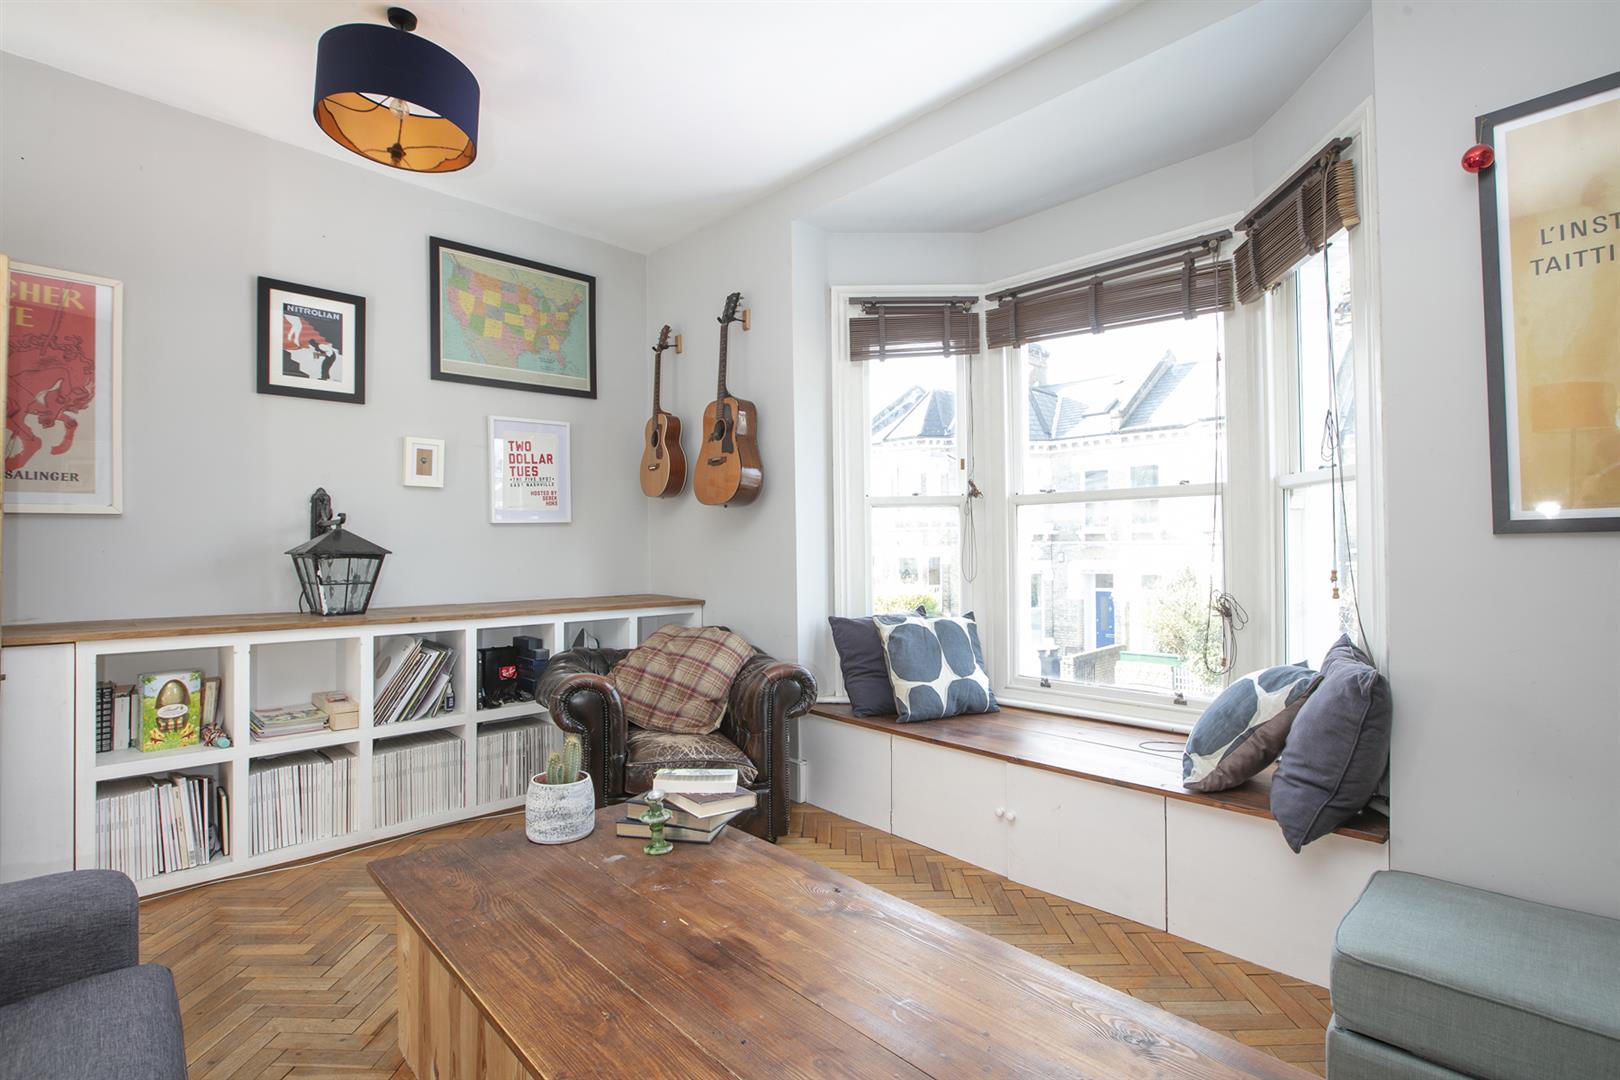 Flat - Conversion For Sale in Shenley Road, London, SE5 782 view1